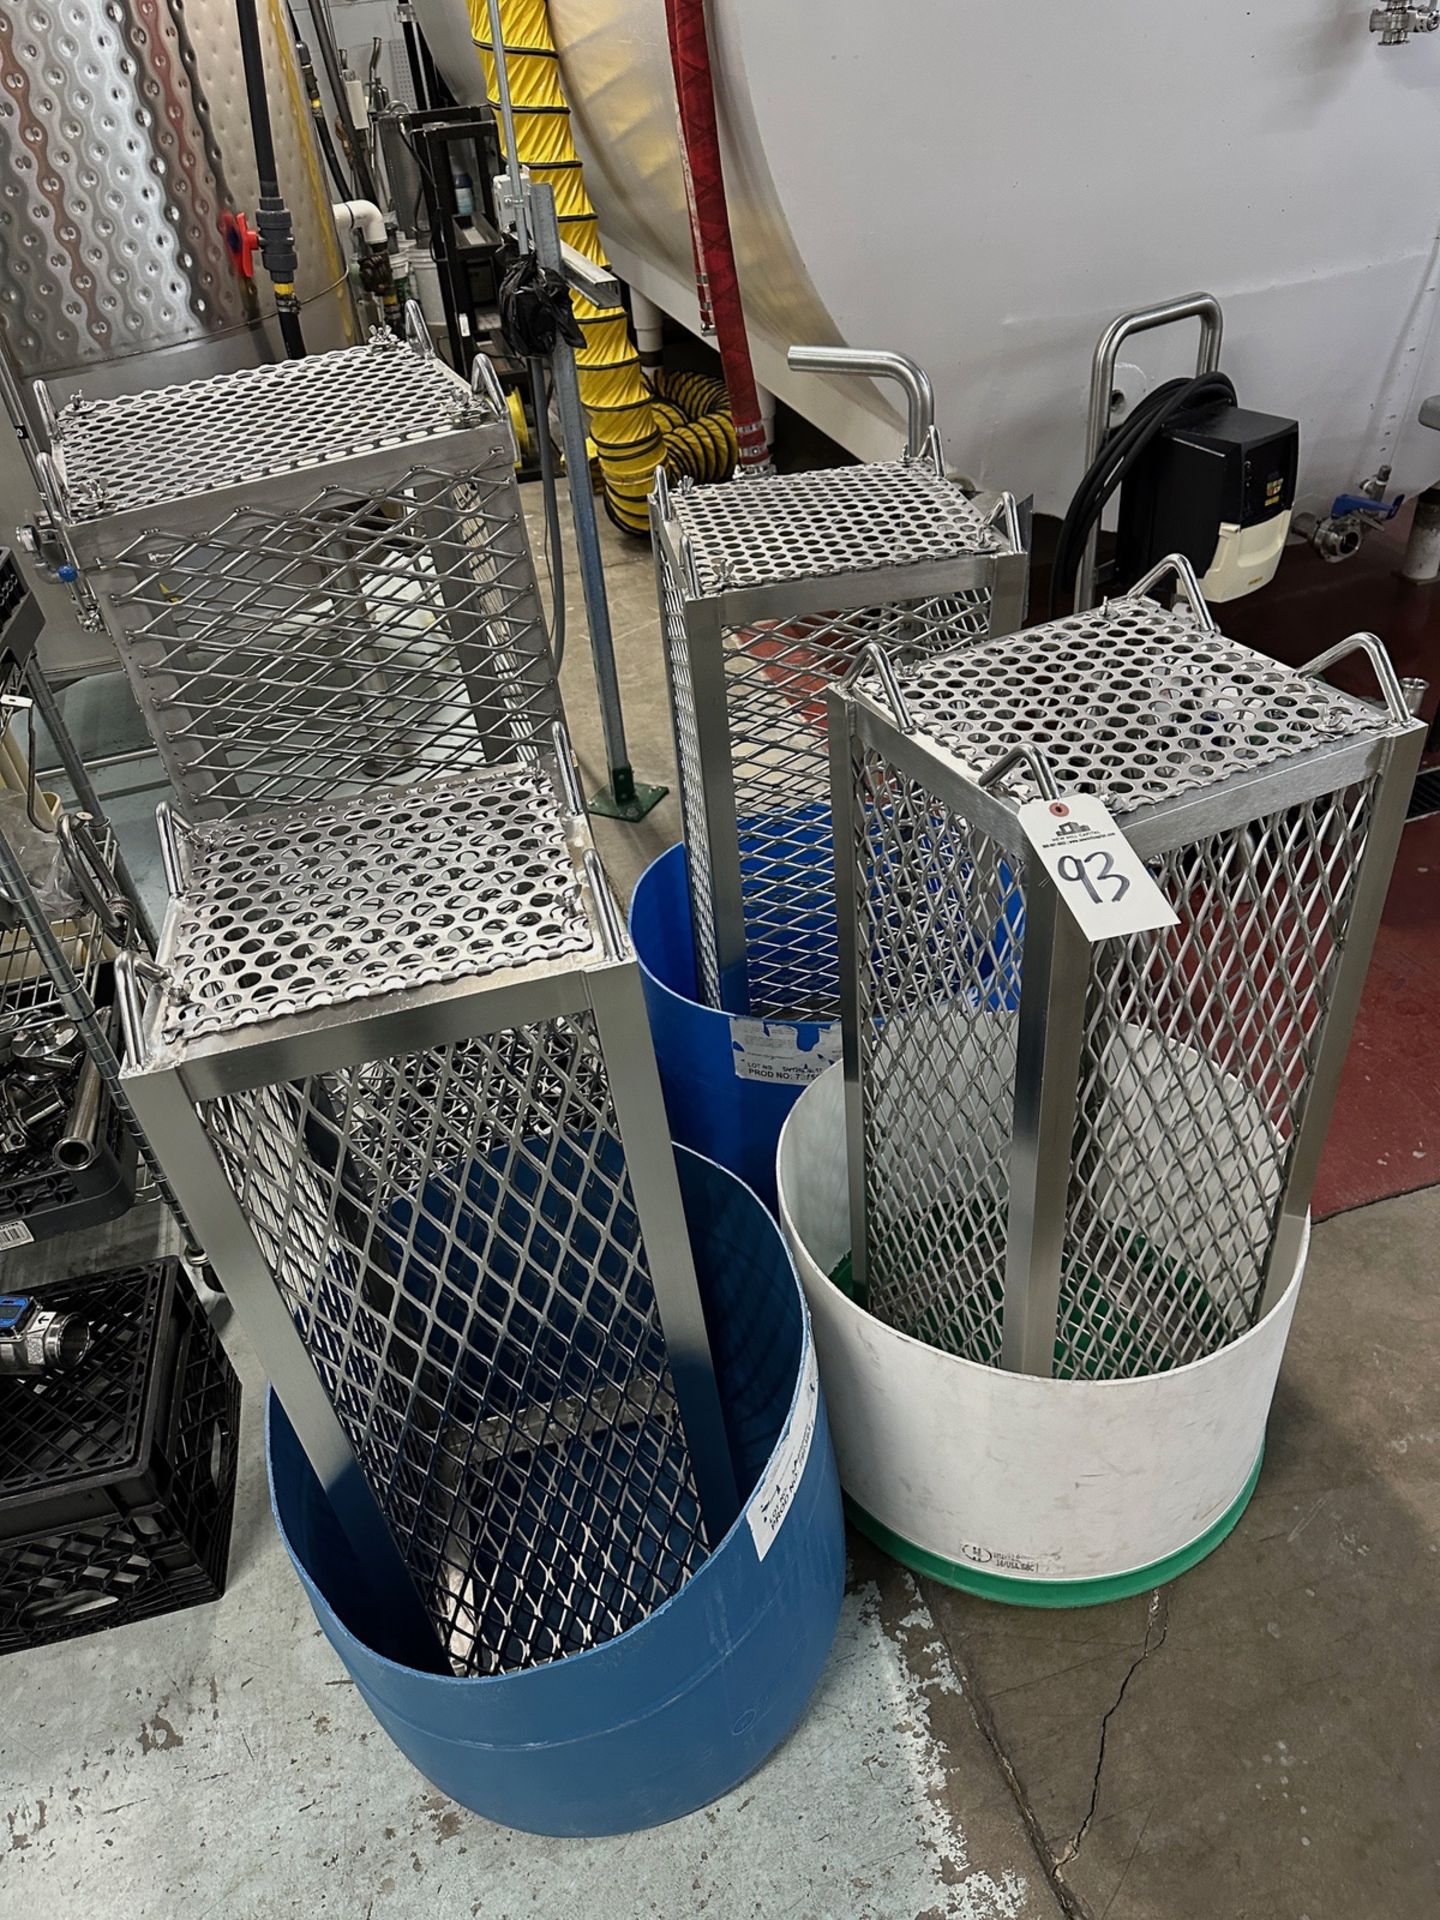 Lot of (4) Stainless Steel Ingredient Cages (Approx. 1' x 1' x 3') | Rig Fee $40